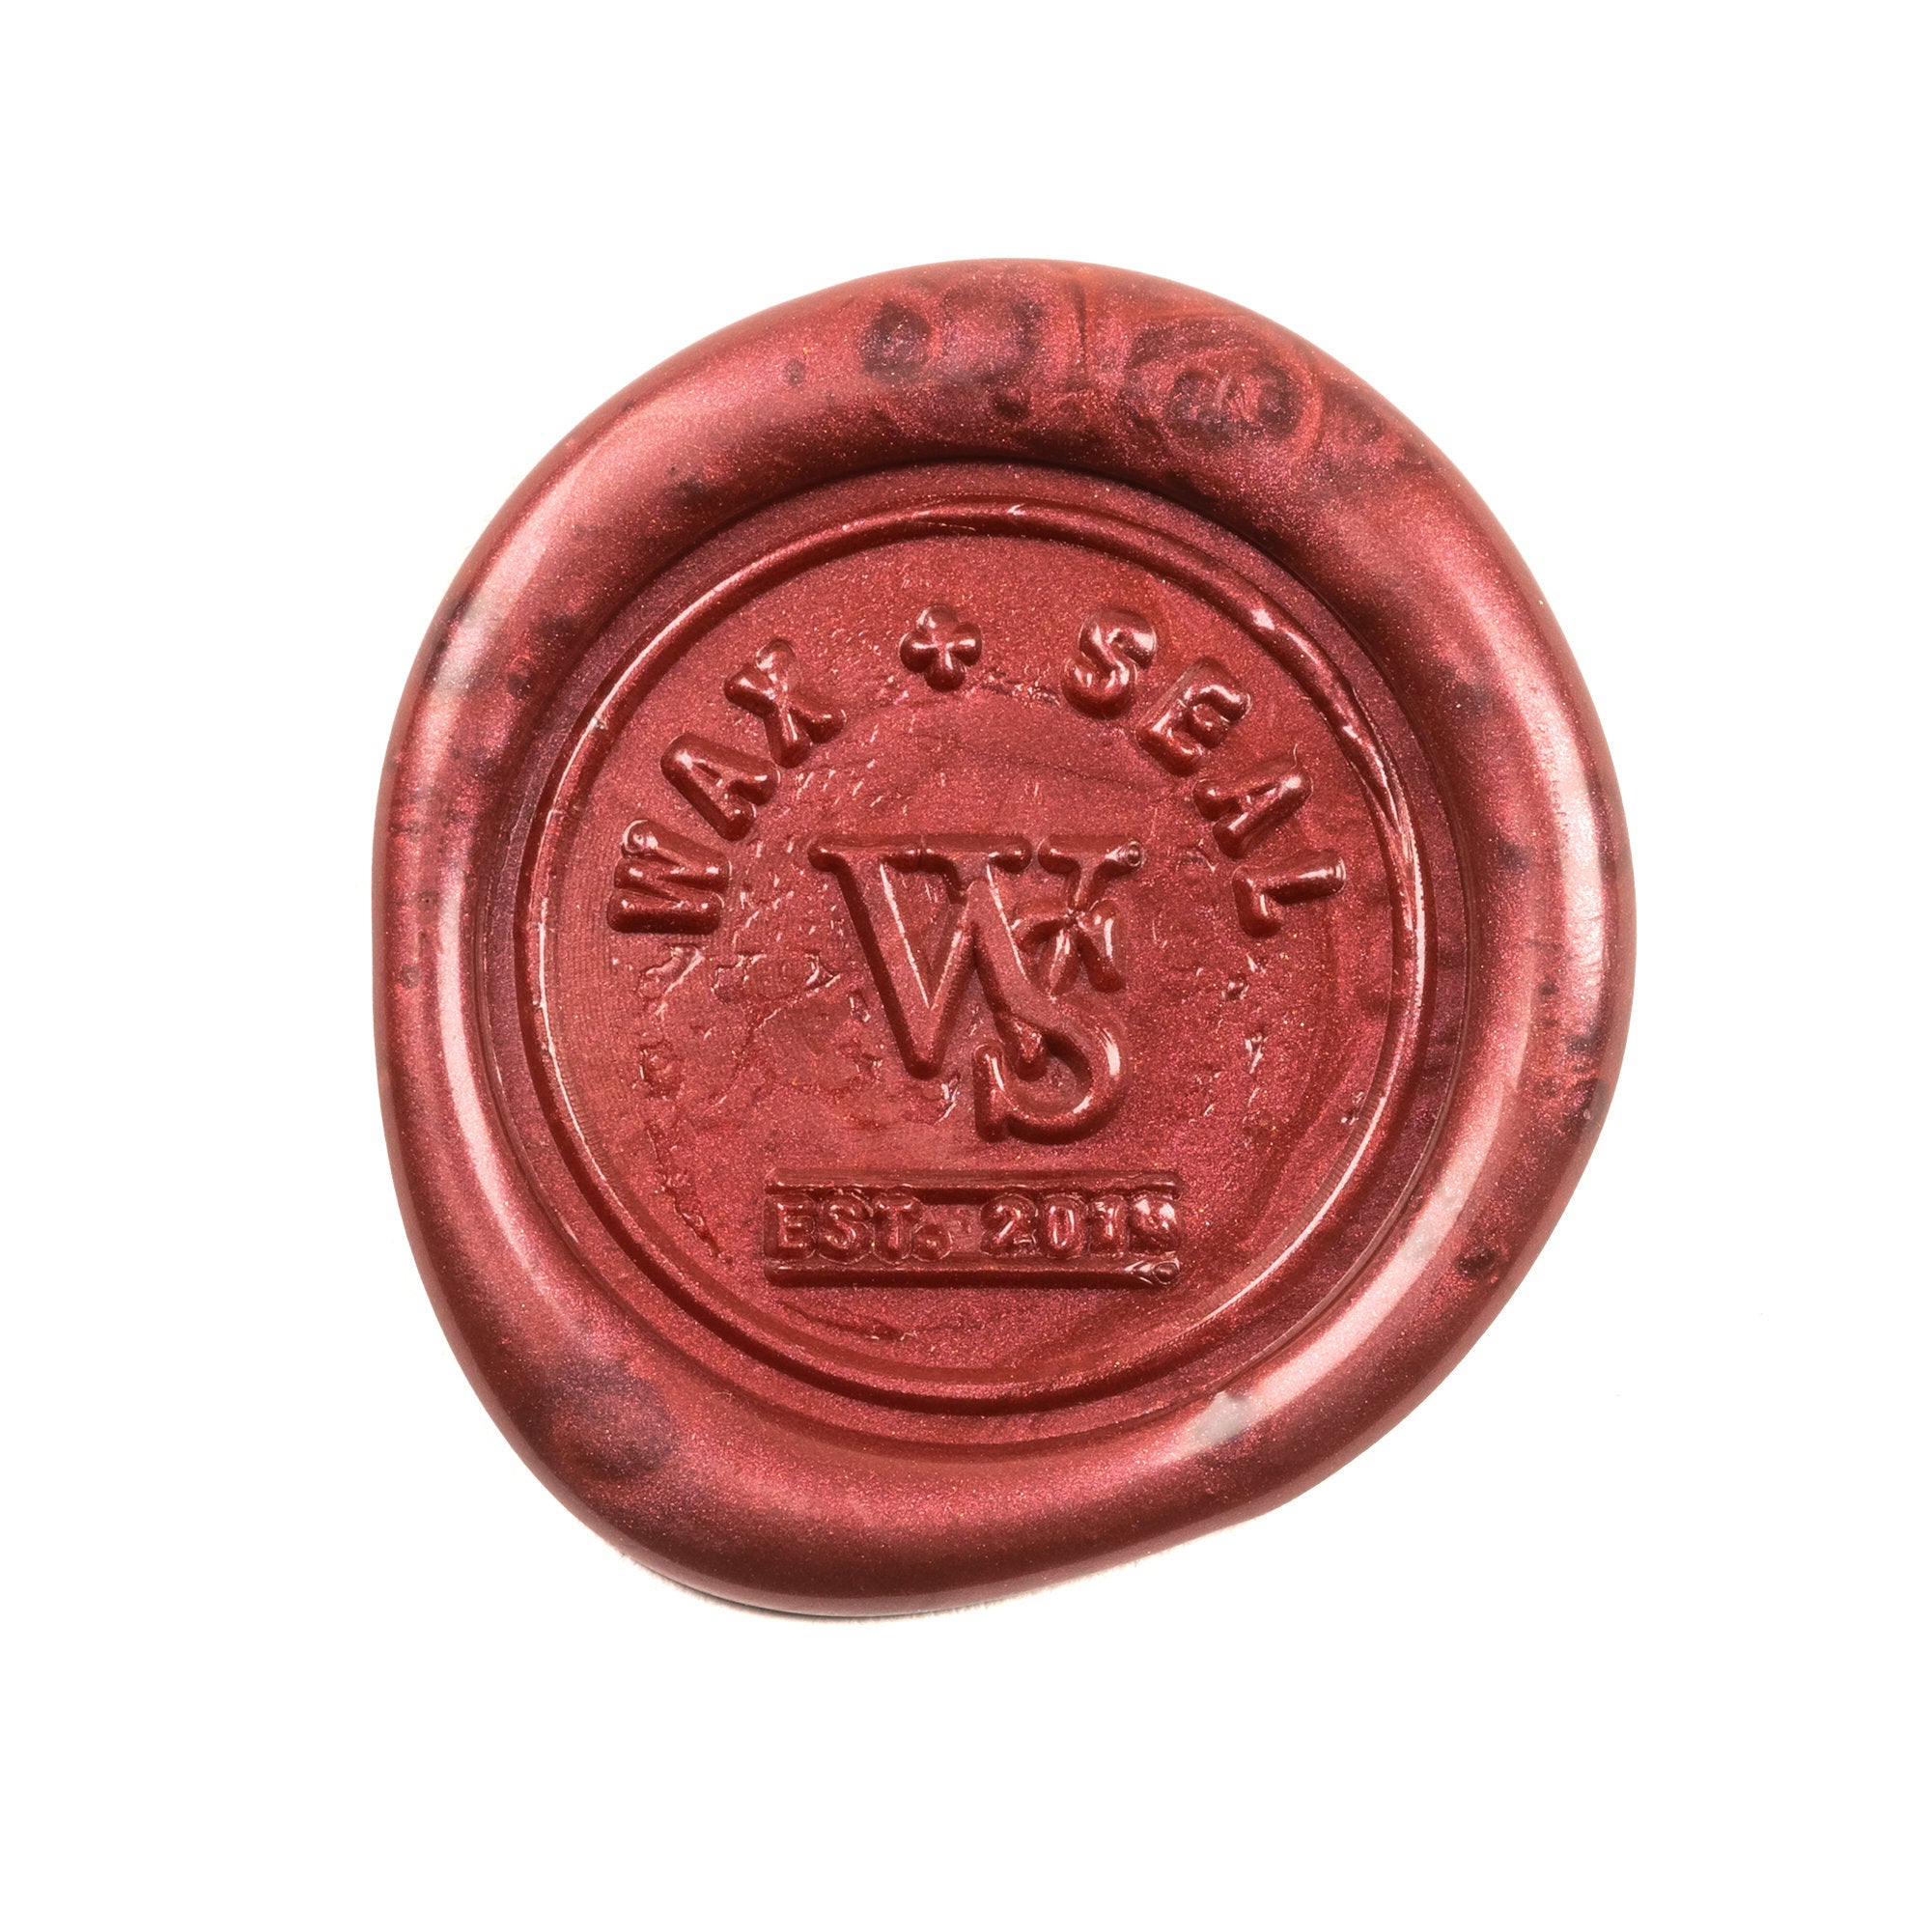 Sealing Wax Beads - Ruby Red | Red Sealing Wax for envelope seals |  Invitation Stamps | Wax seal supplies